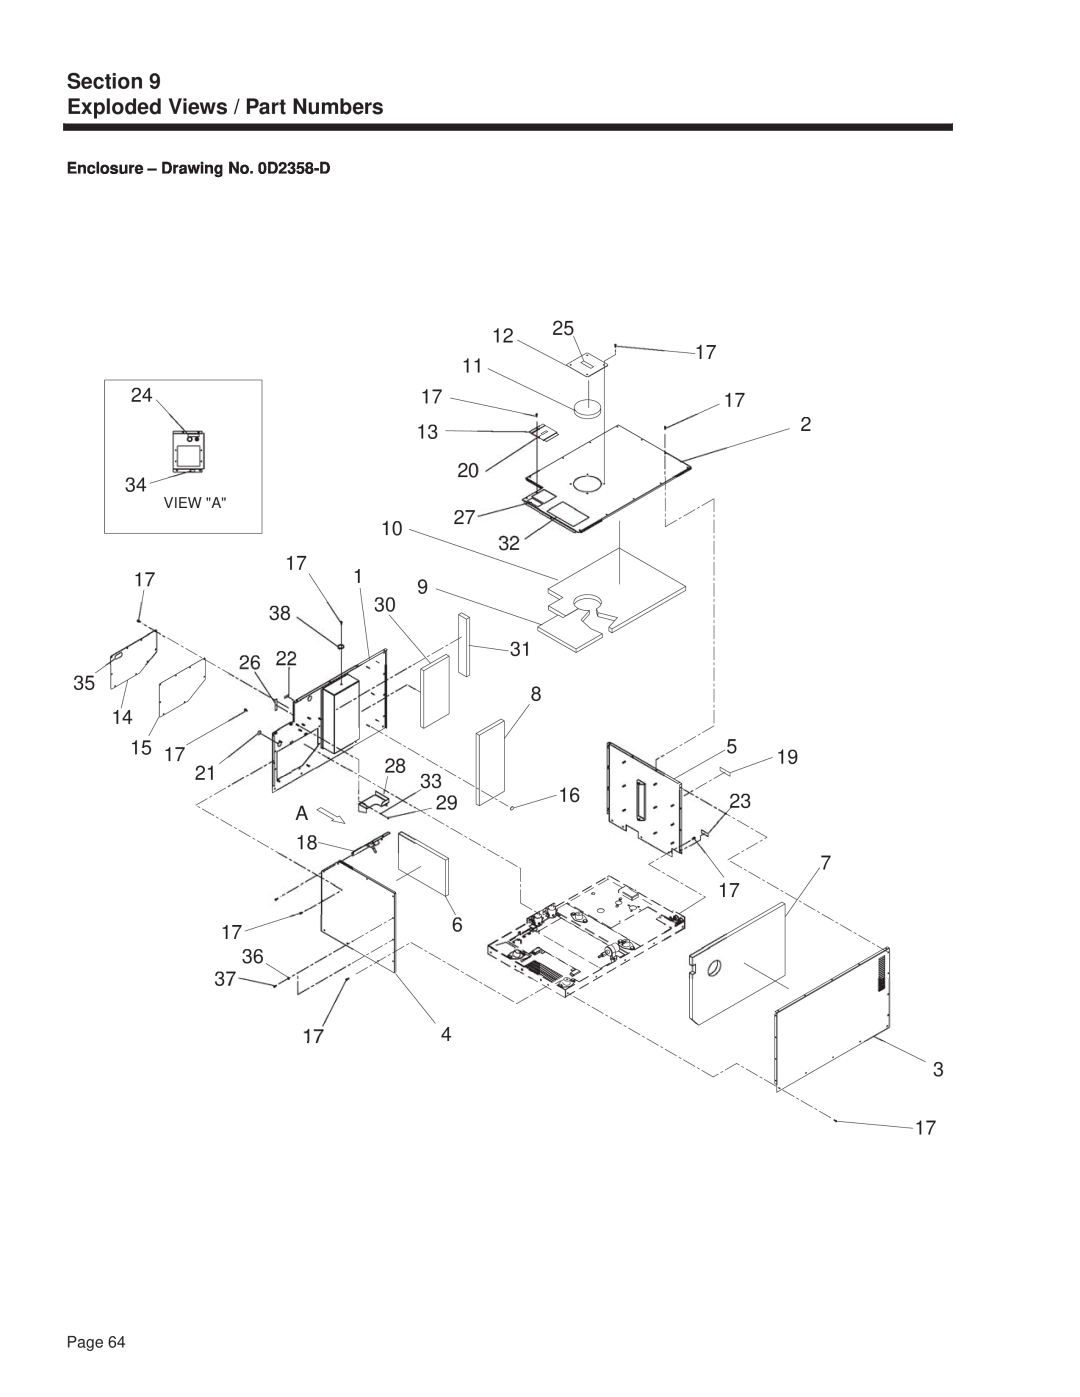 Guardian Technologies 4270 manual Section Exploded Views / Part Numbers, Enclosure - Drawing No. 0D2358-D, Page 